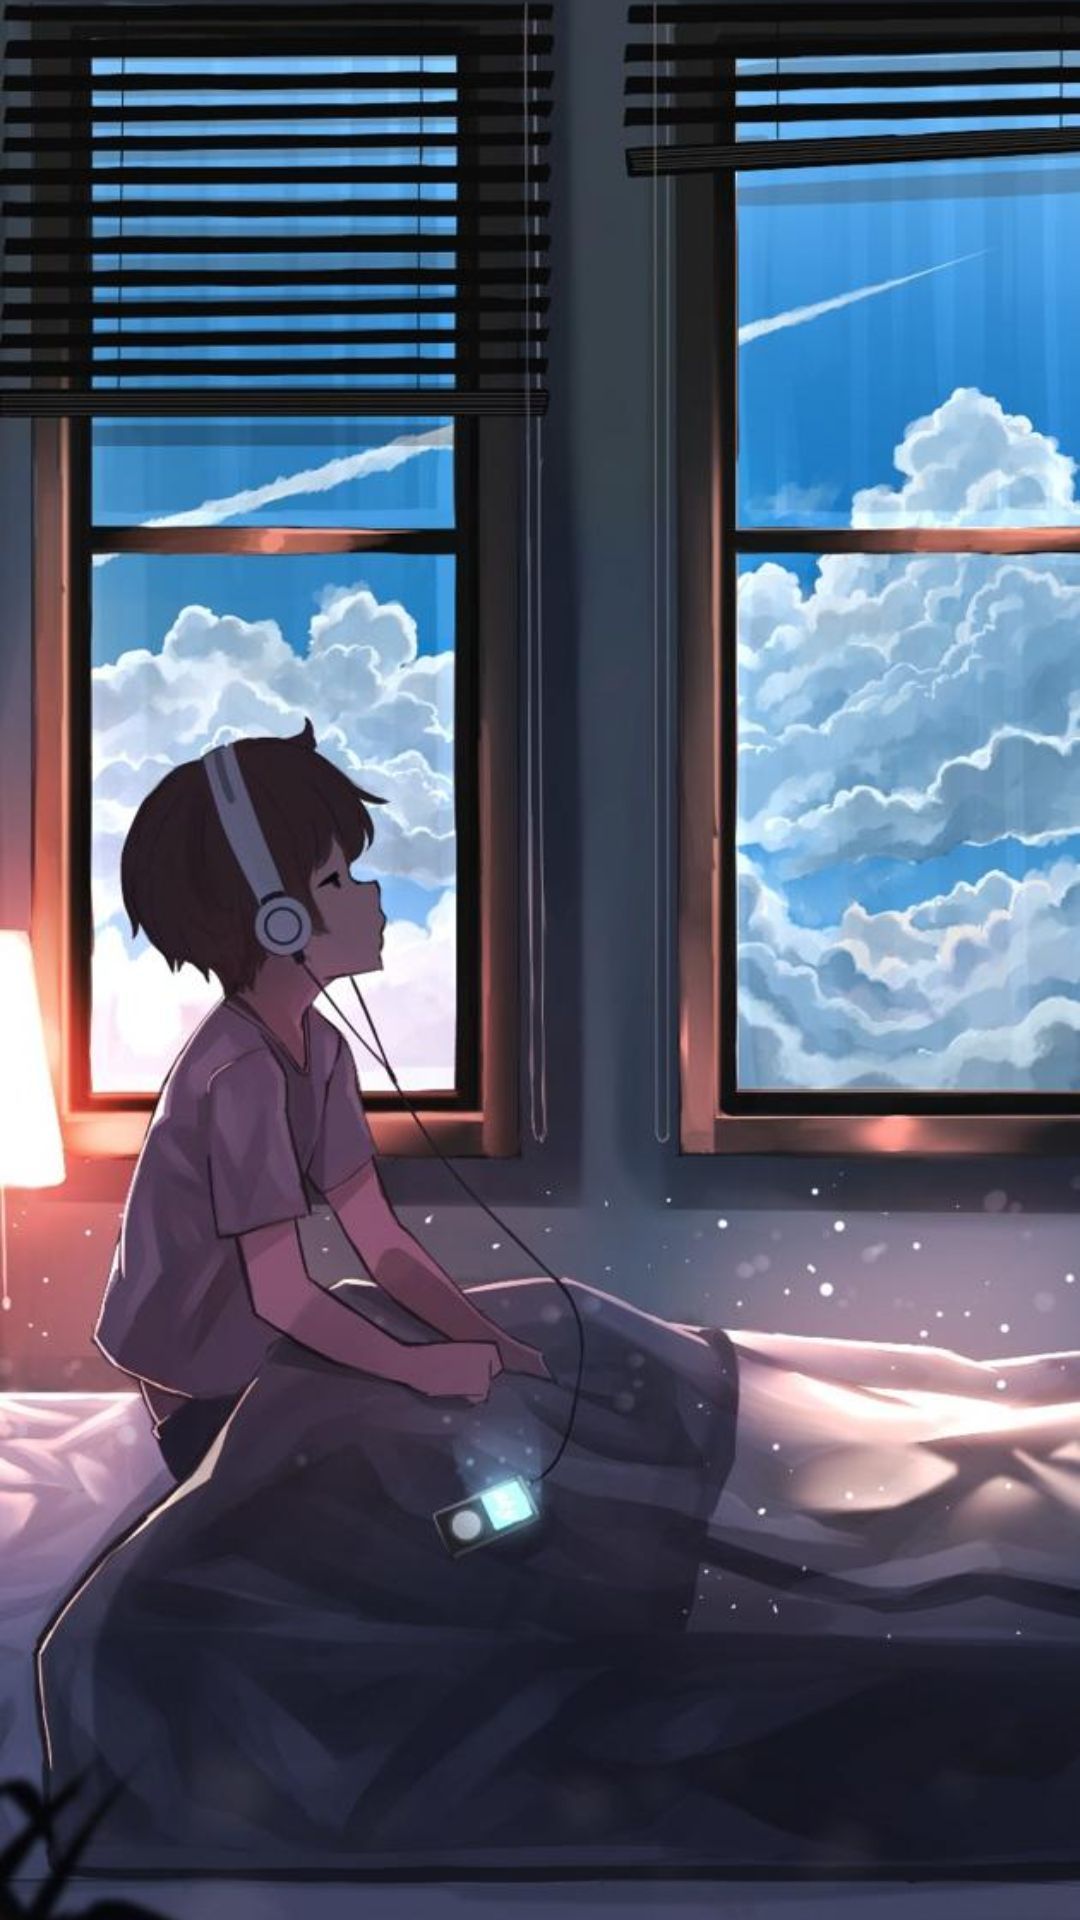 A young boy sitting on his bed looking out the window - Lo fi